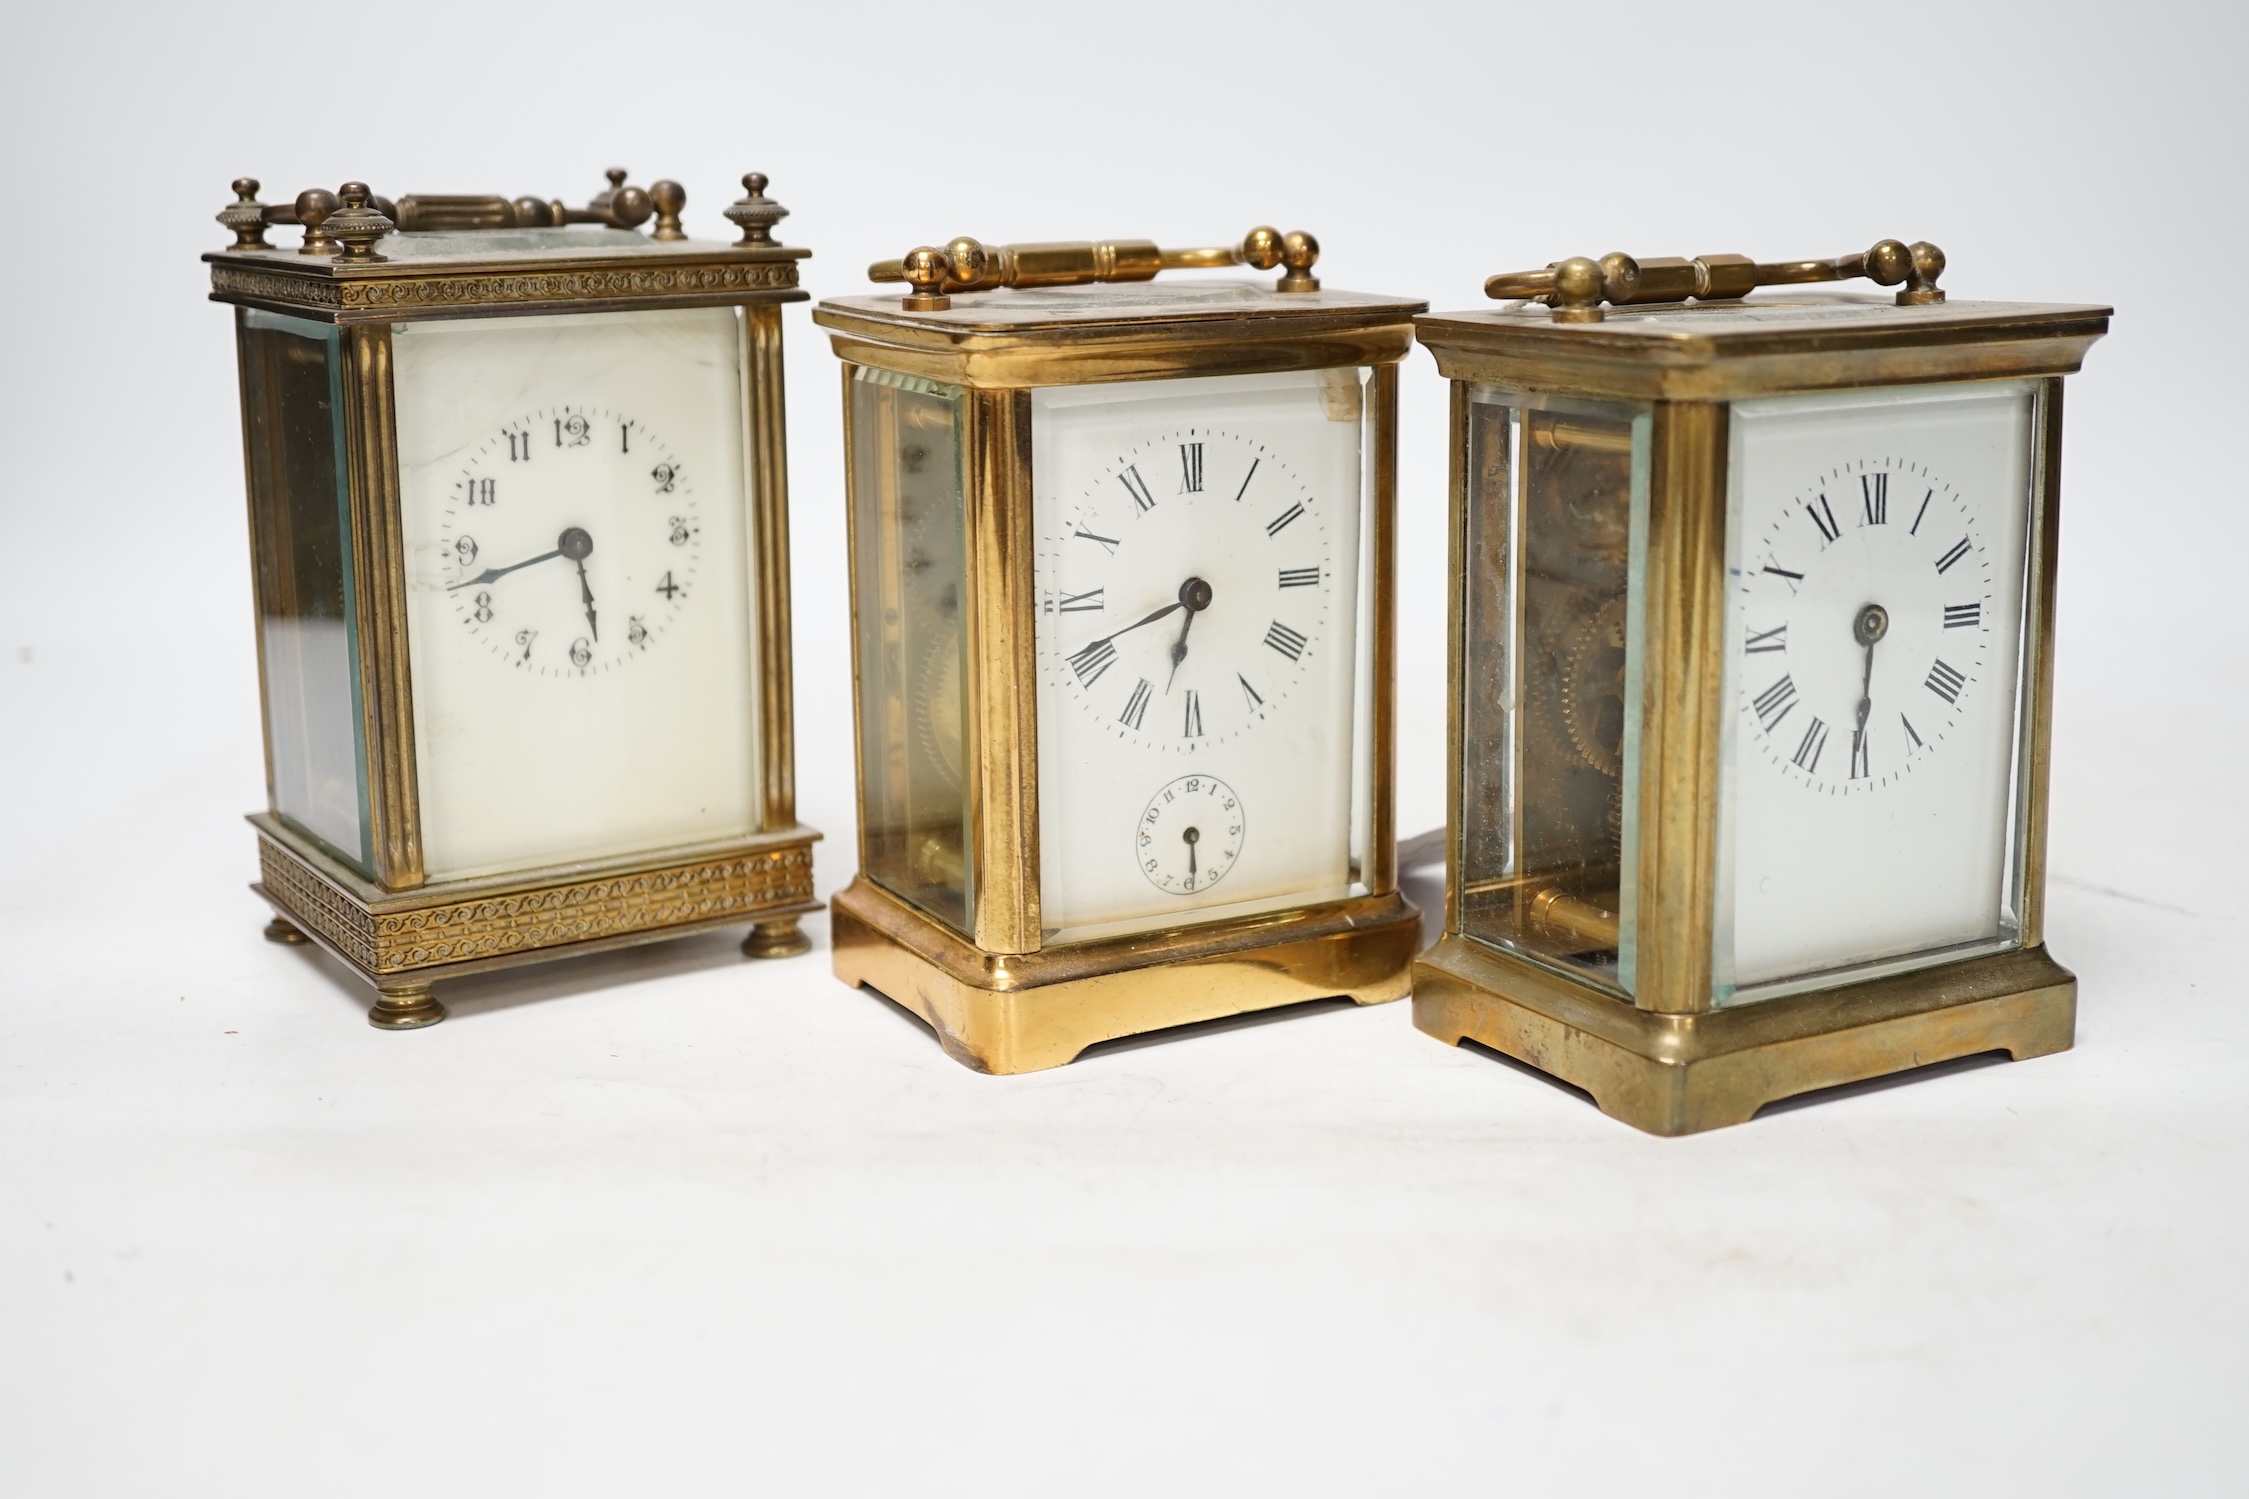 Three carriage timepieces with enamel dials, largest 14.5cm high. Condition - poor to fair